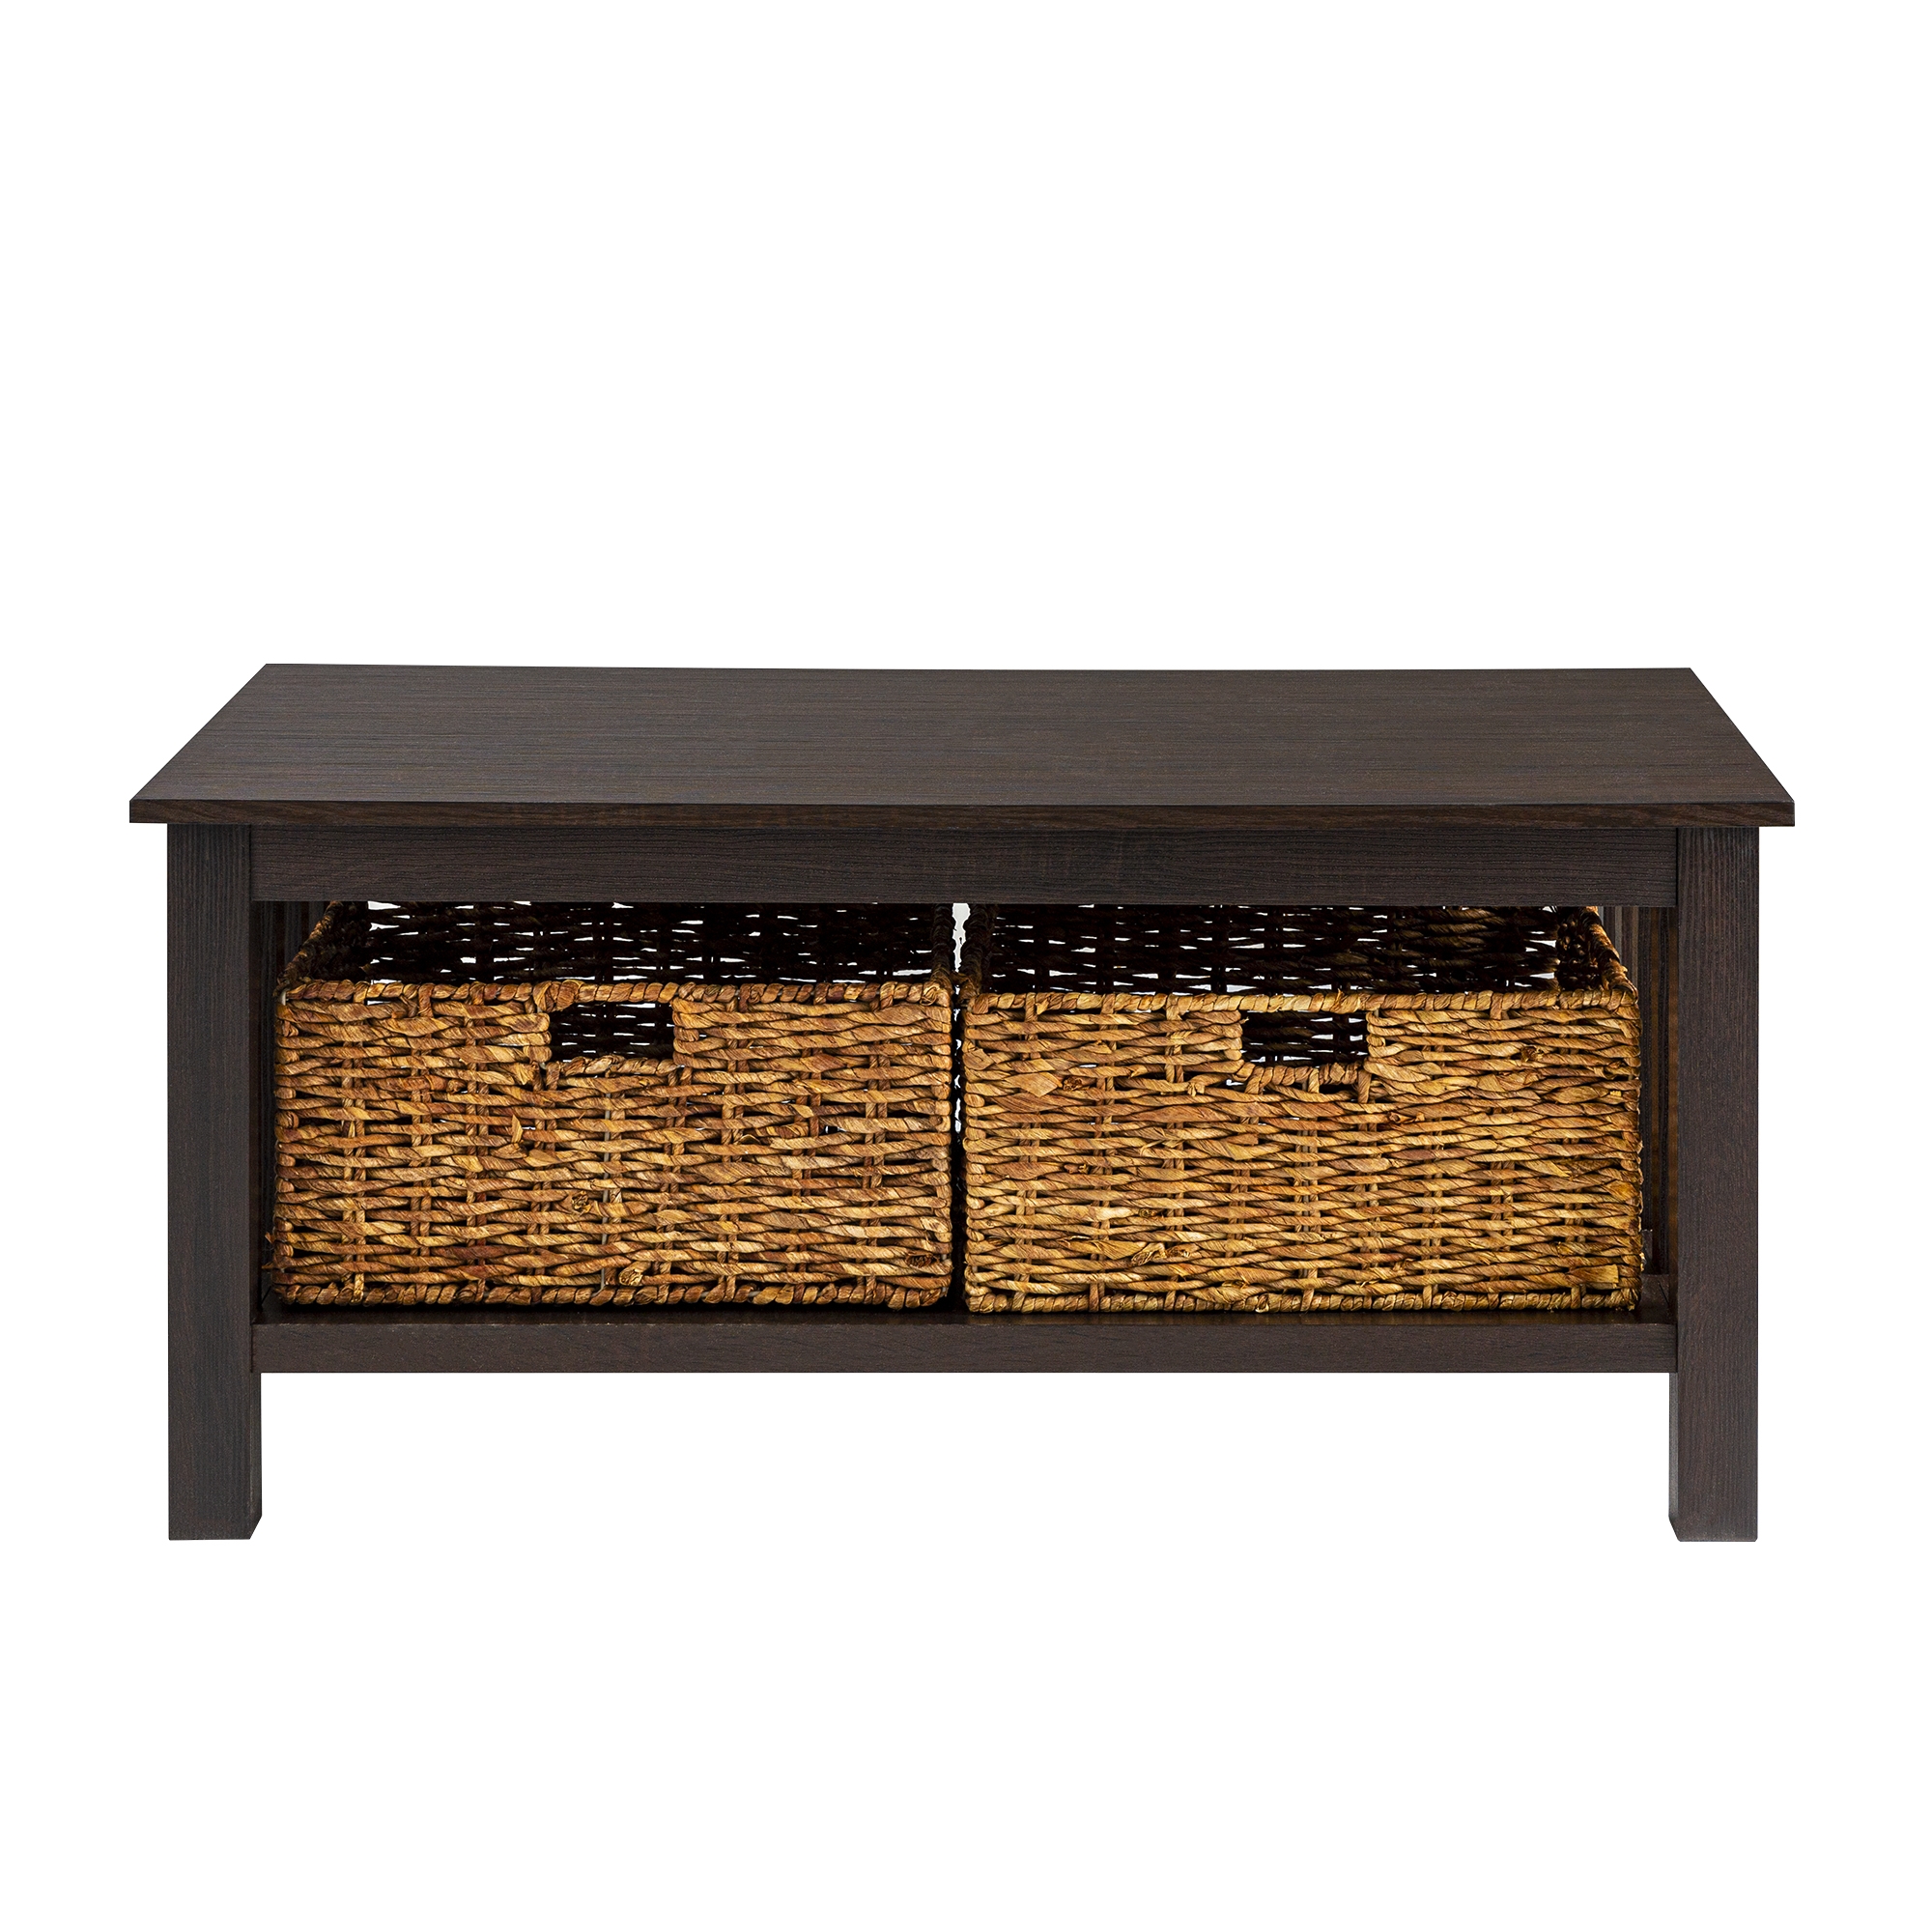 Mission Storage Coffee Table with Baskets - Espresso - Image 1